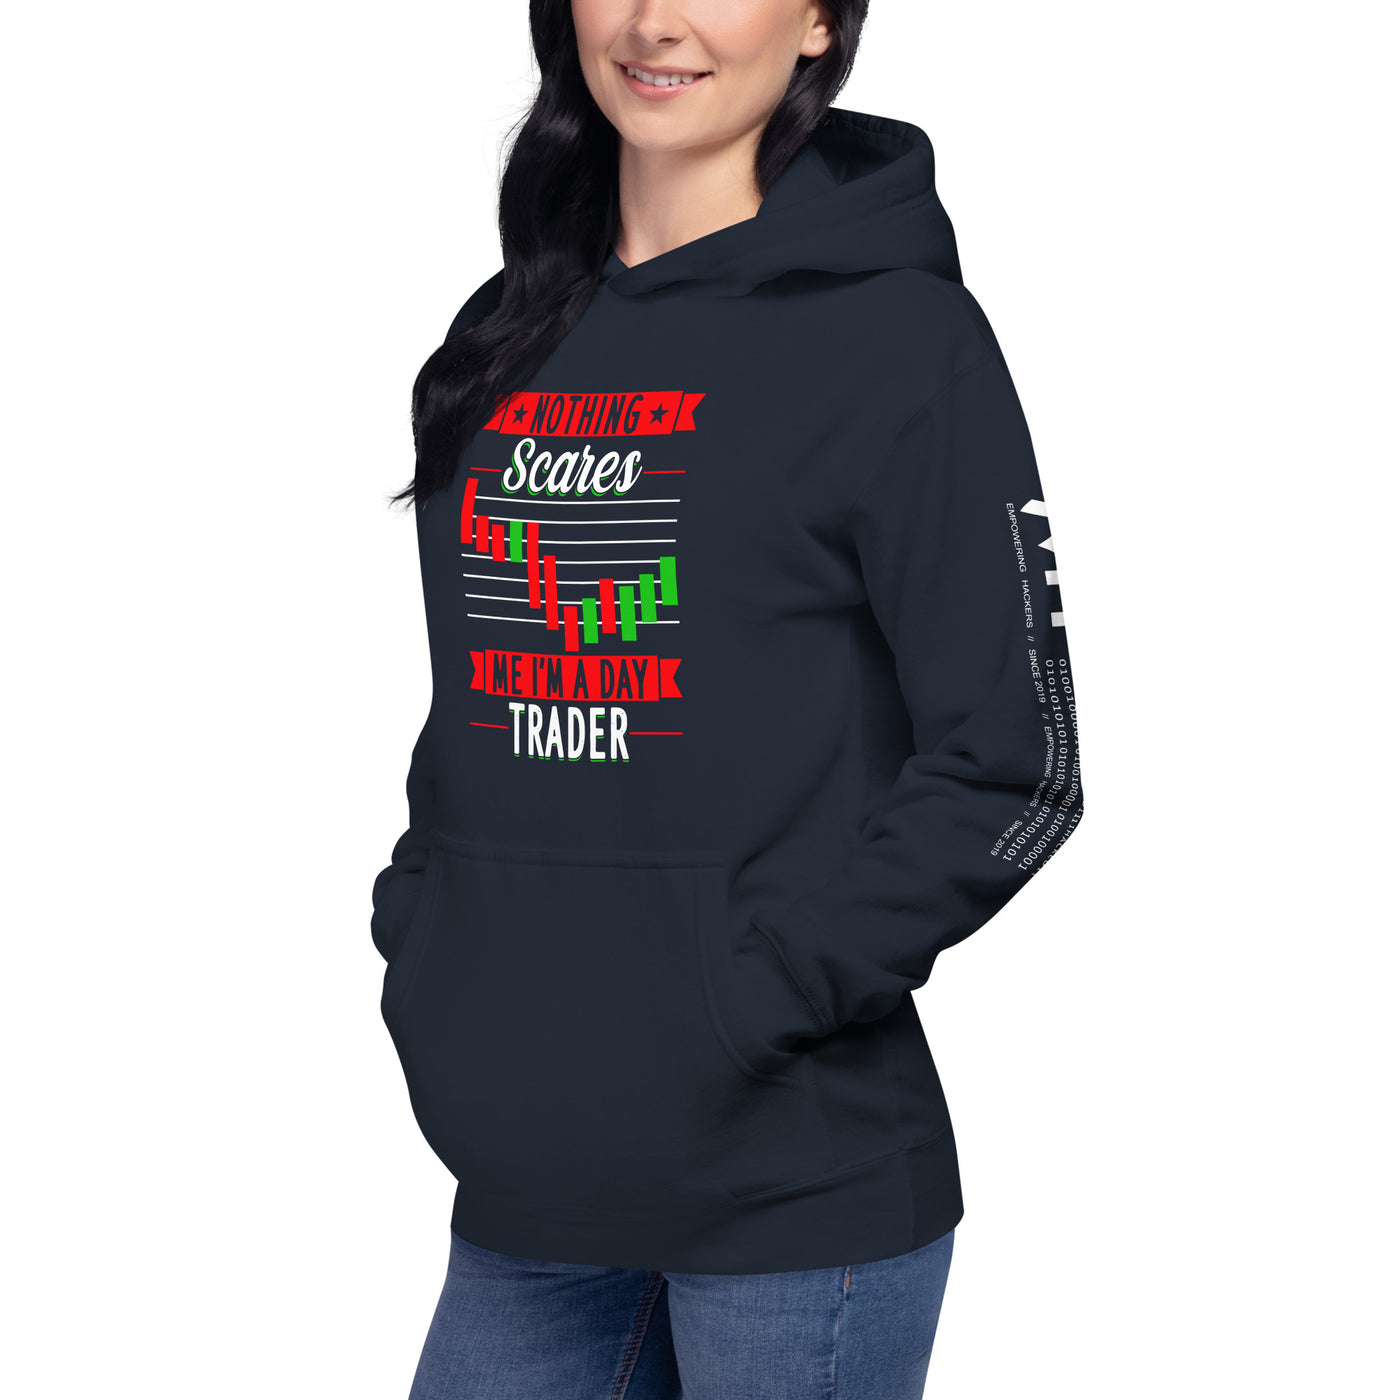 Nothing Scares me; I Am a Day Trader - Unisex Hoodie